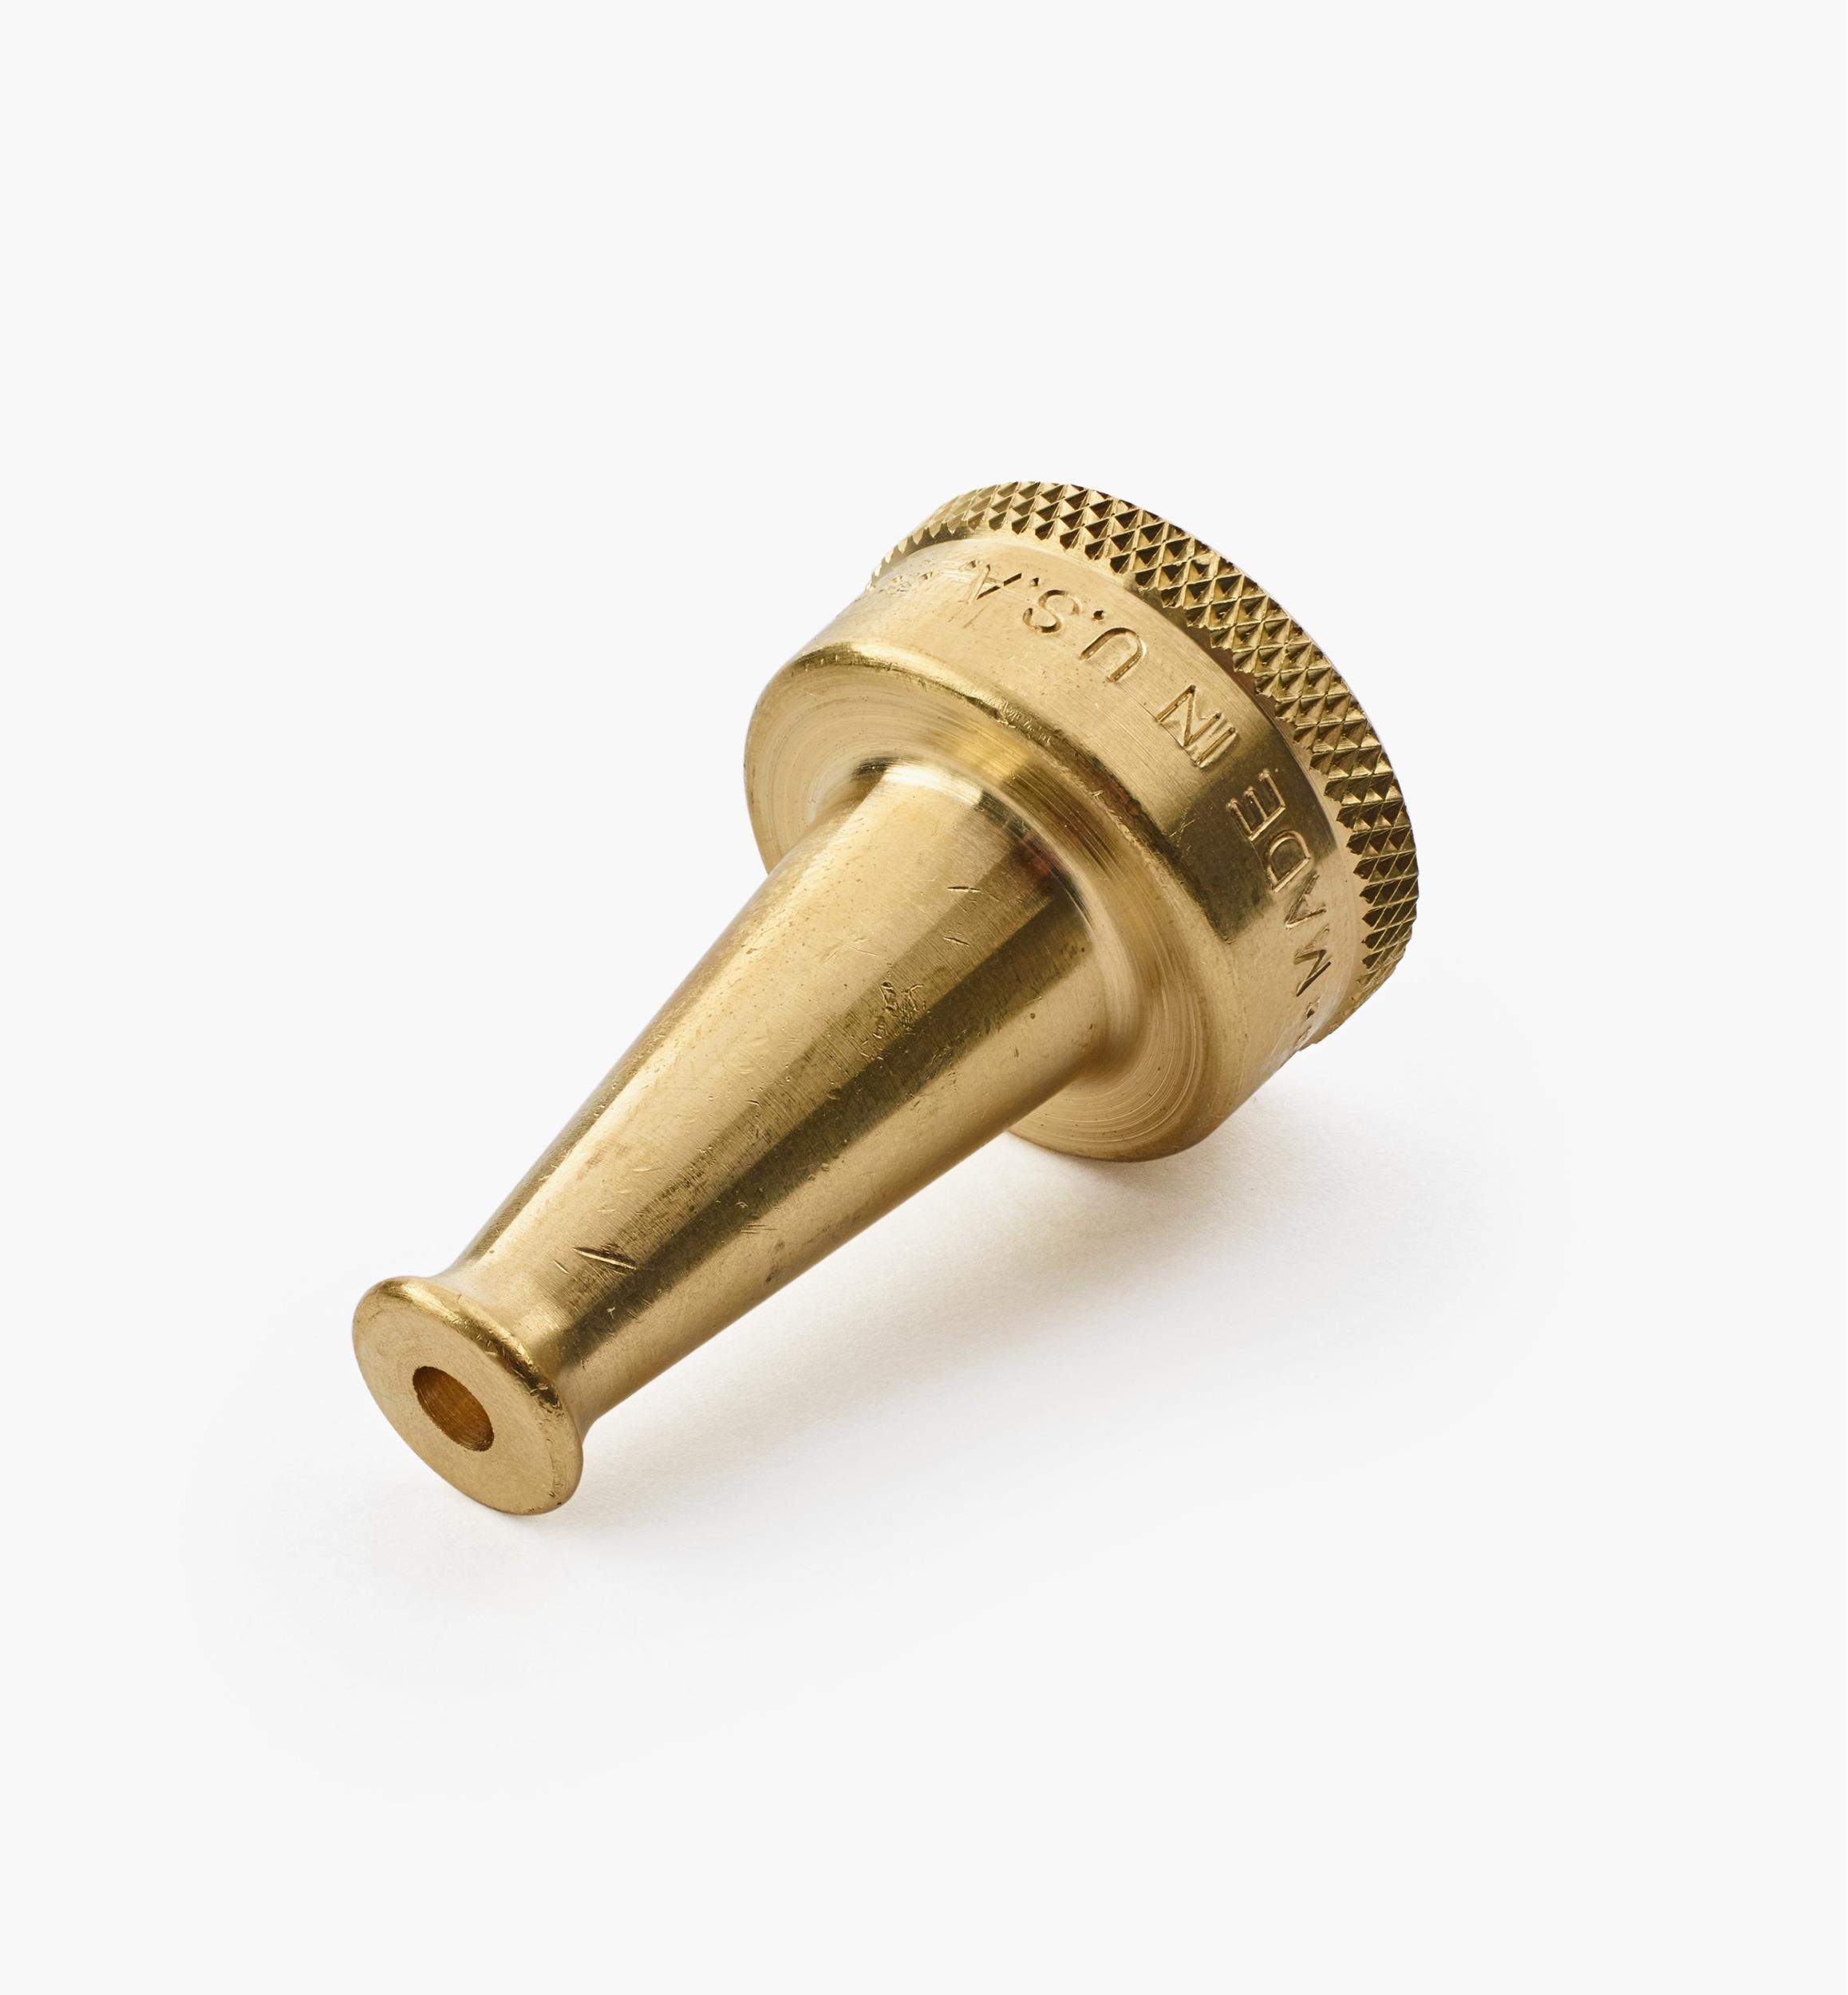 Brass Sweeper Nozzle